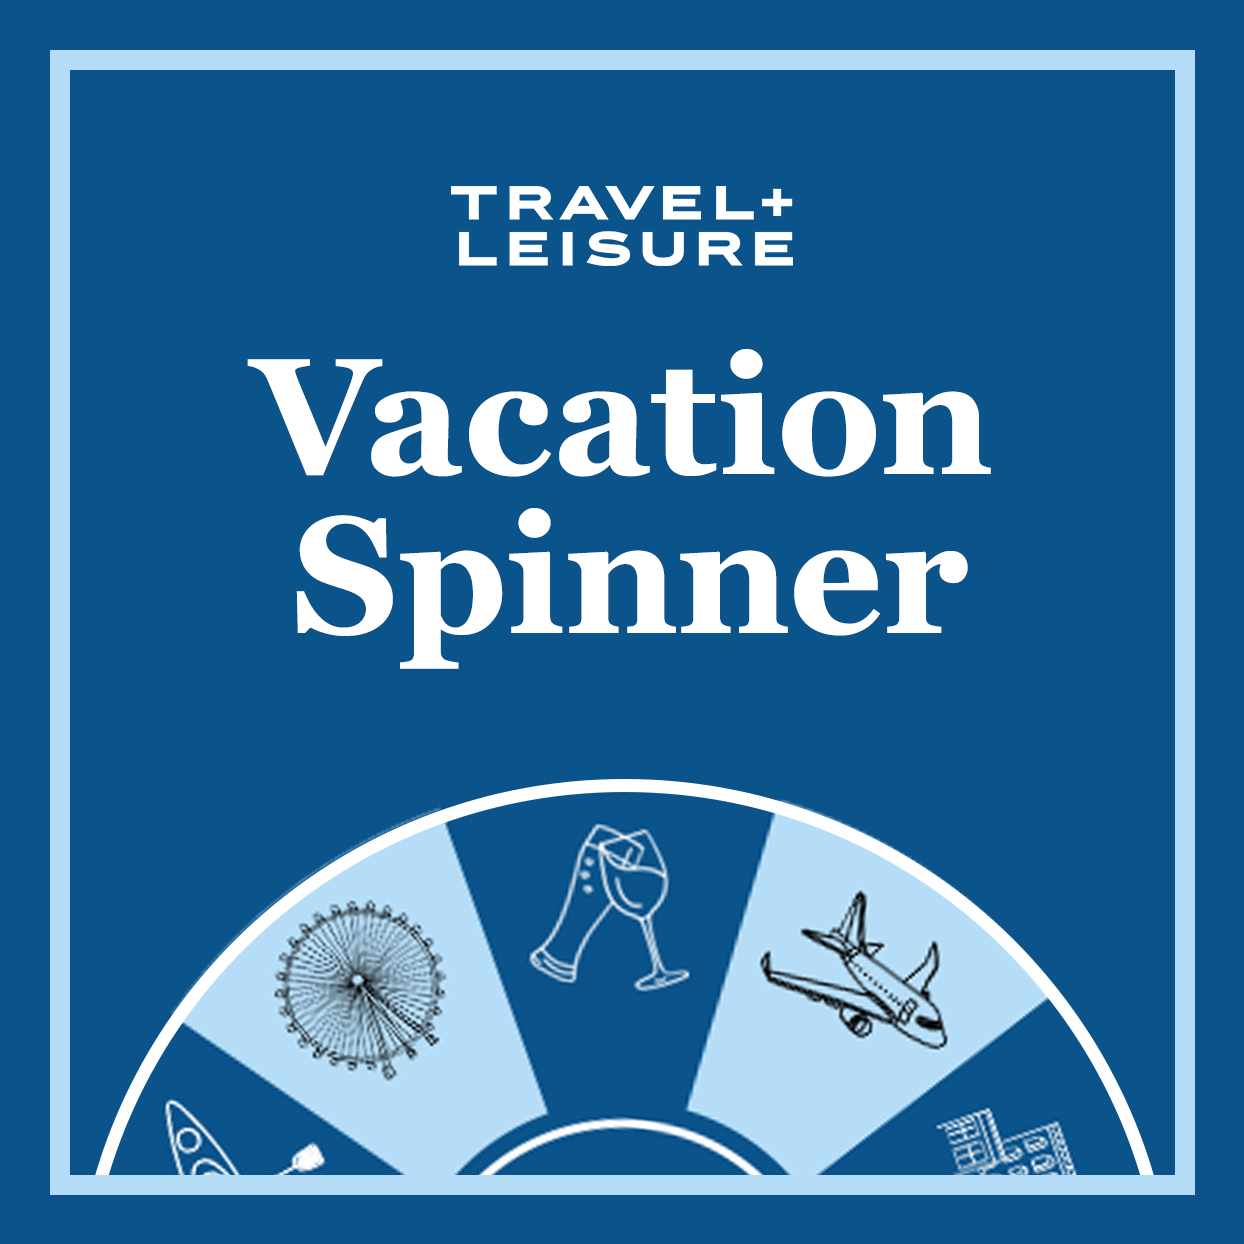 Vacation Spinner Sweepstakes